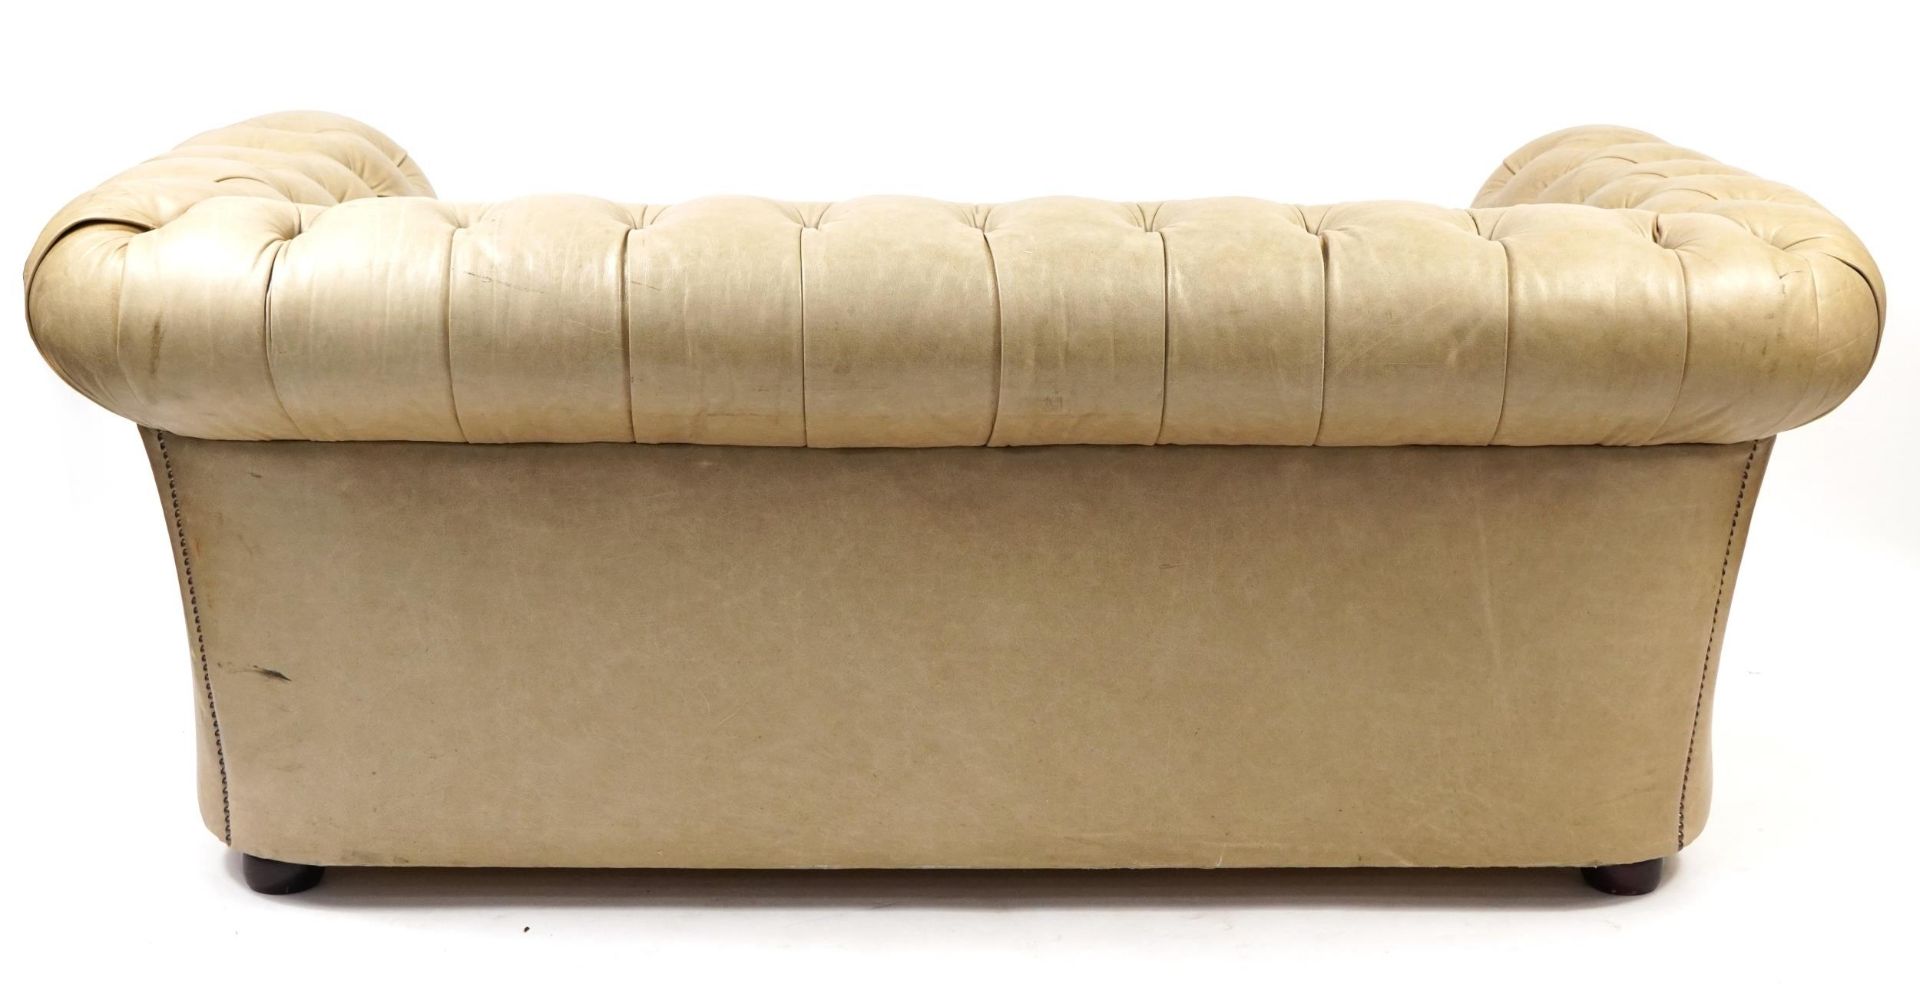 Three seater leather Chesterfield settee, 190cm wide - Image 2 of 2